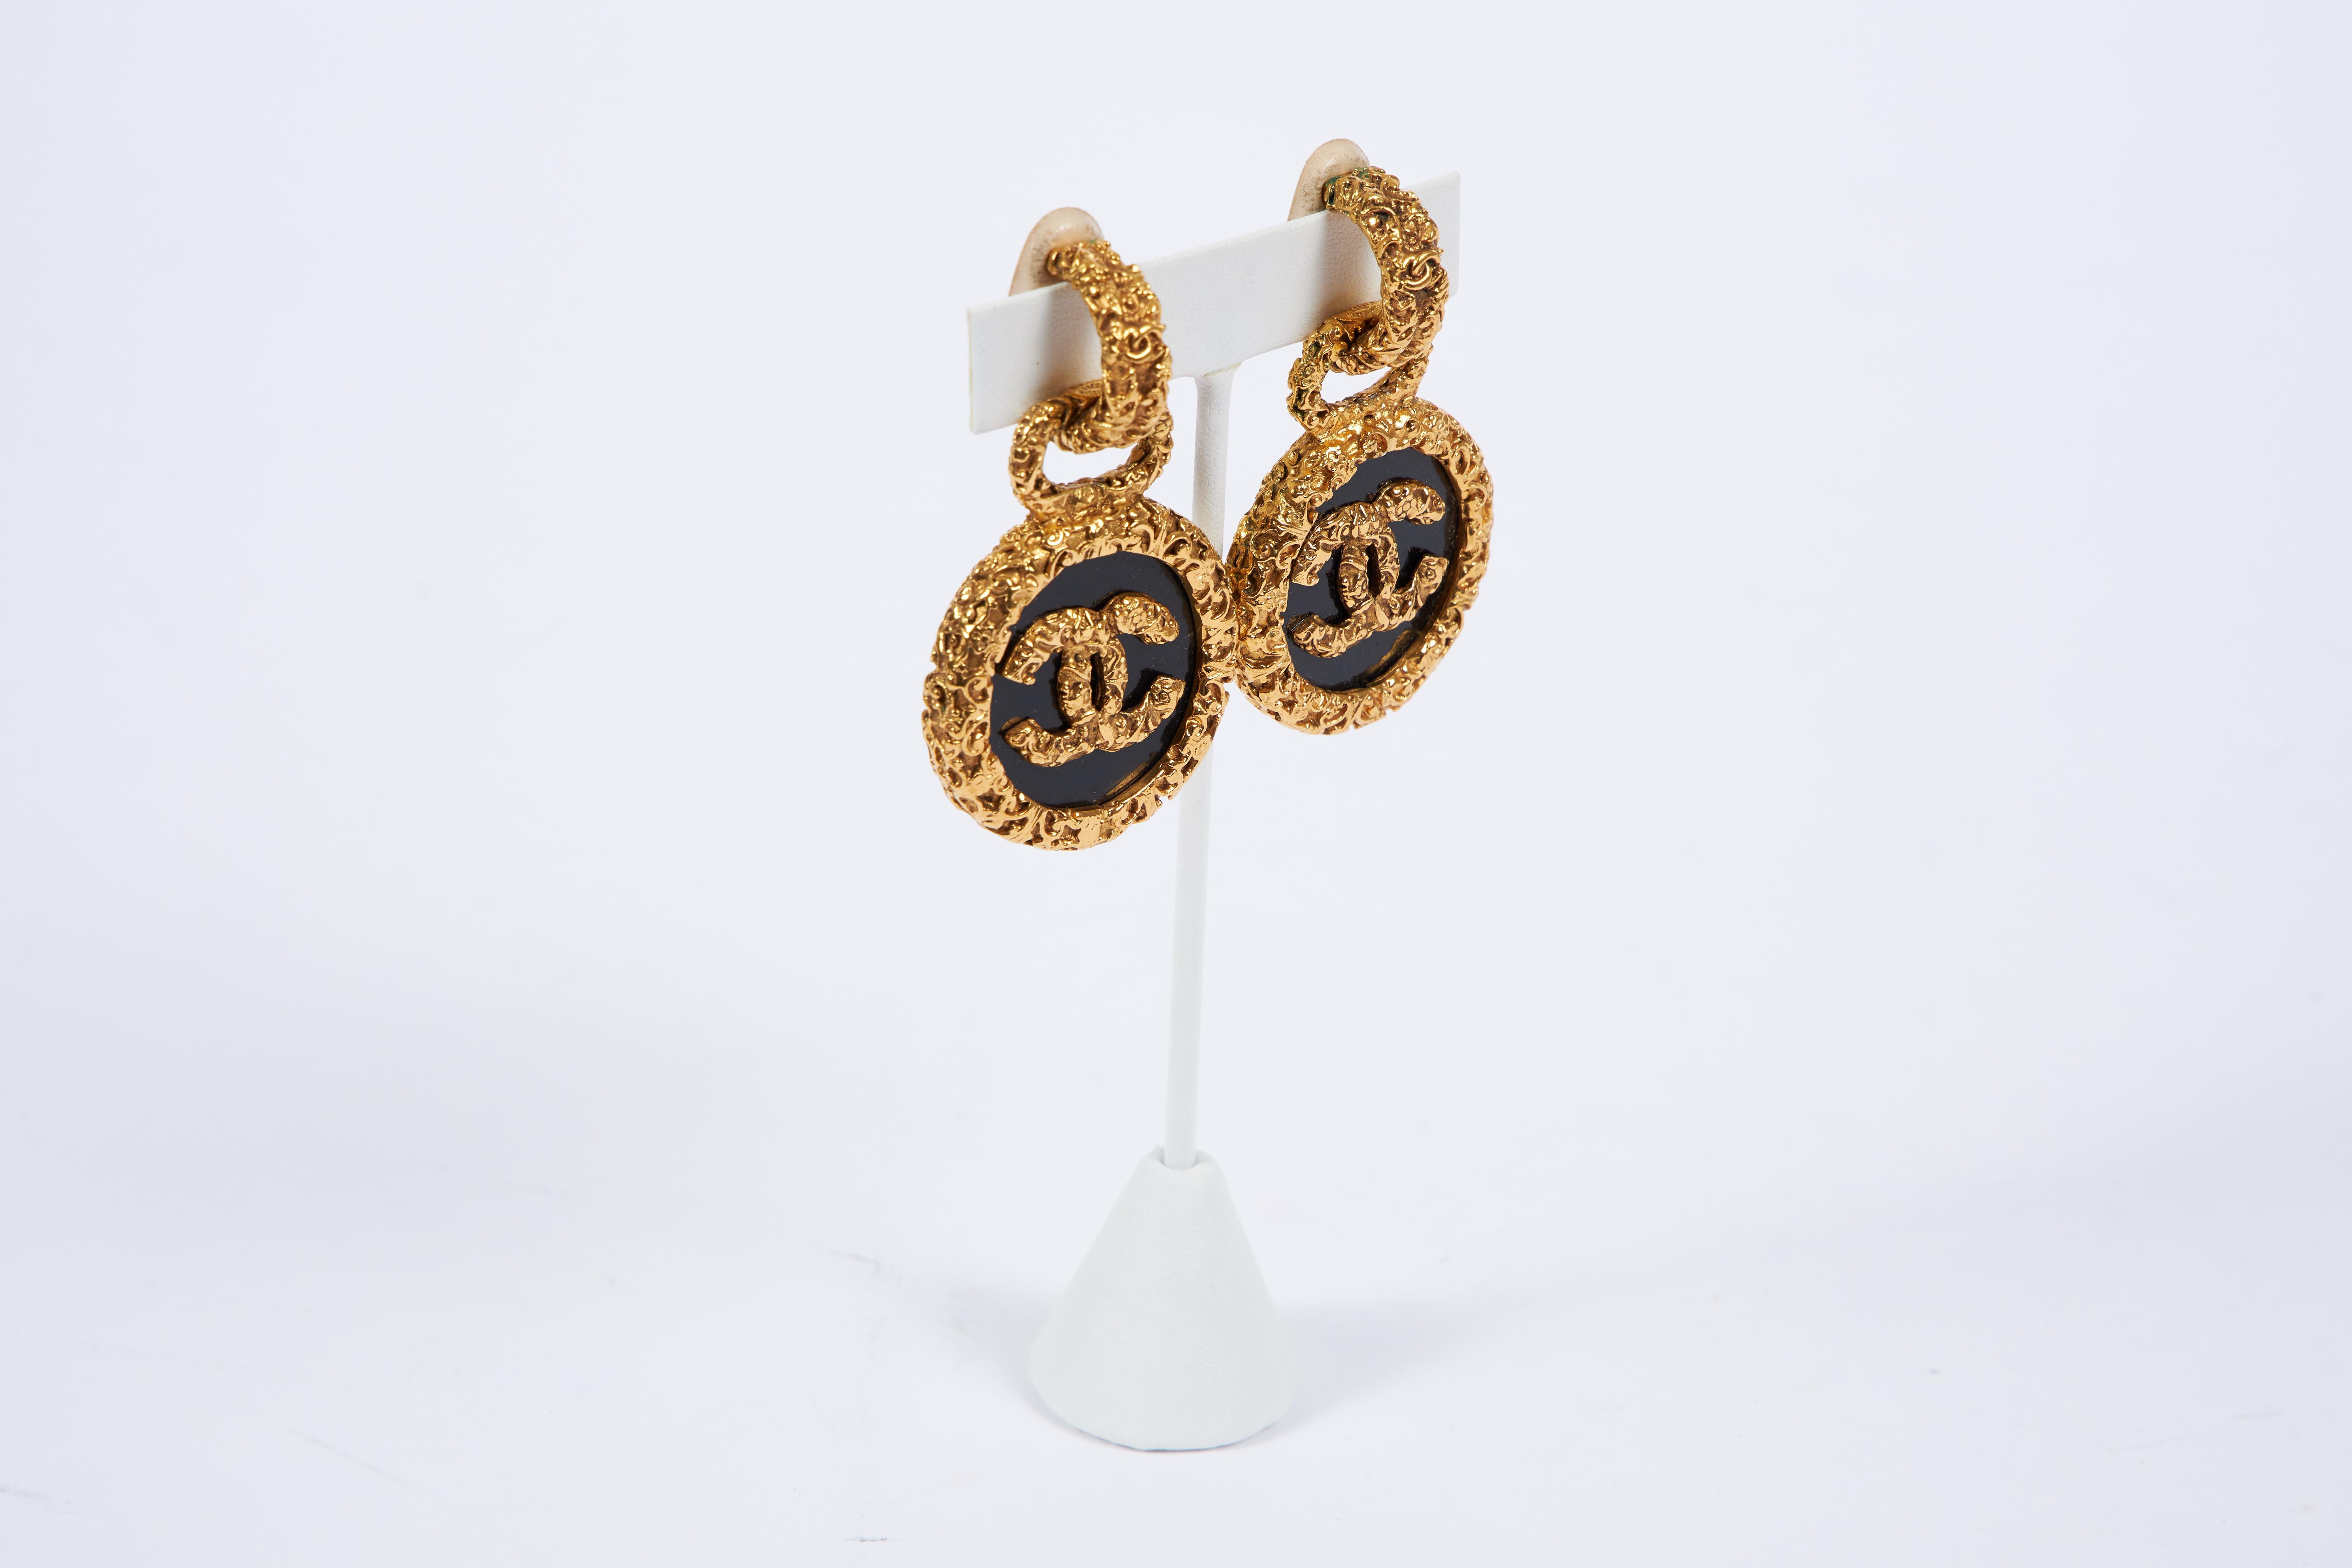 Chanel black glass Florentine drop earrings set in textured goldtone metal. Post backs. Autumn '93 collection. Original box included.